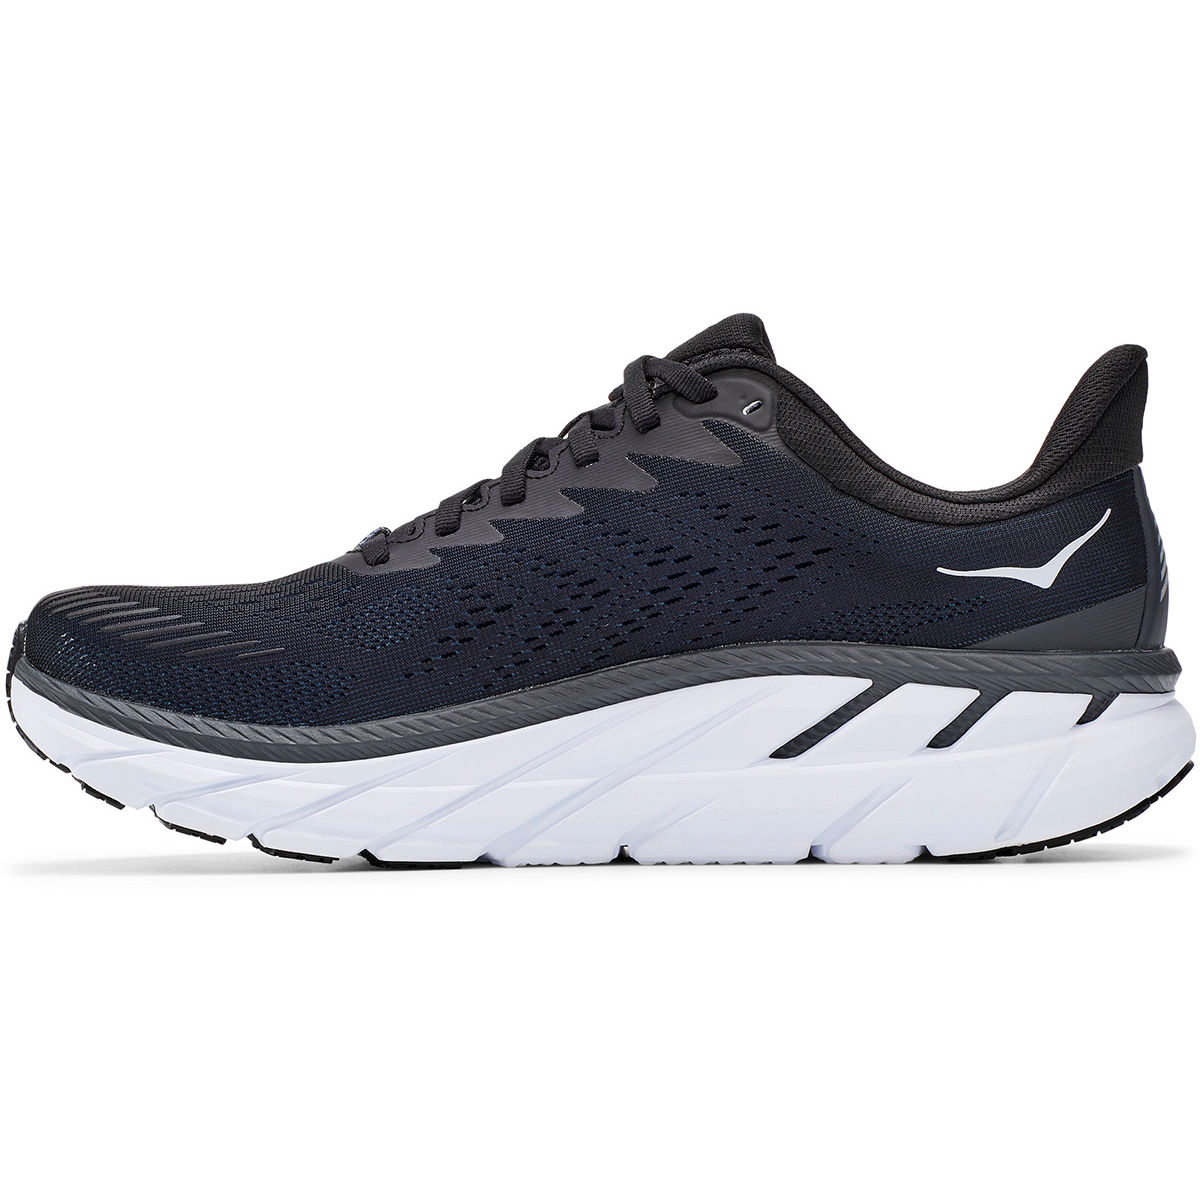 Hoka Clifton 7 - best women's shoes for arch support